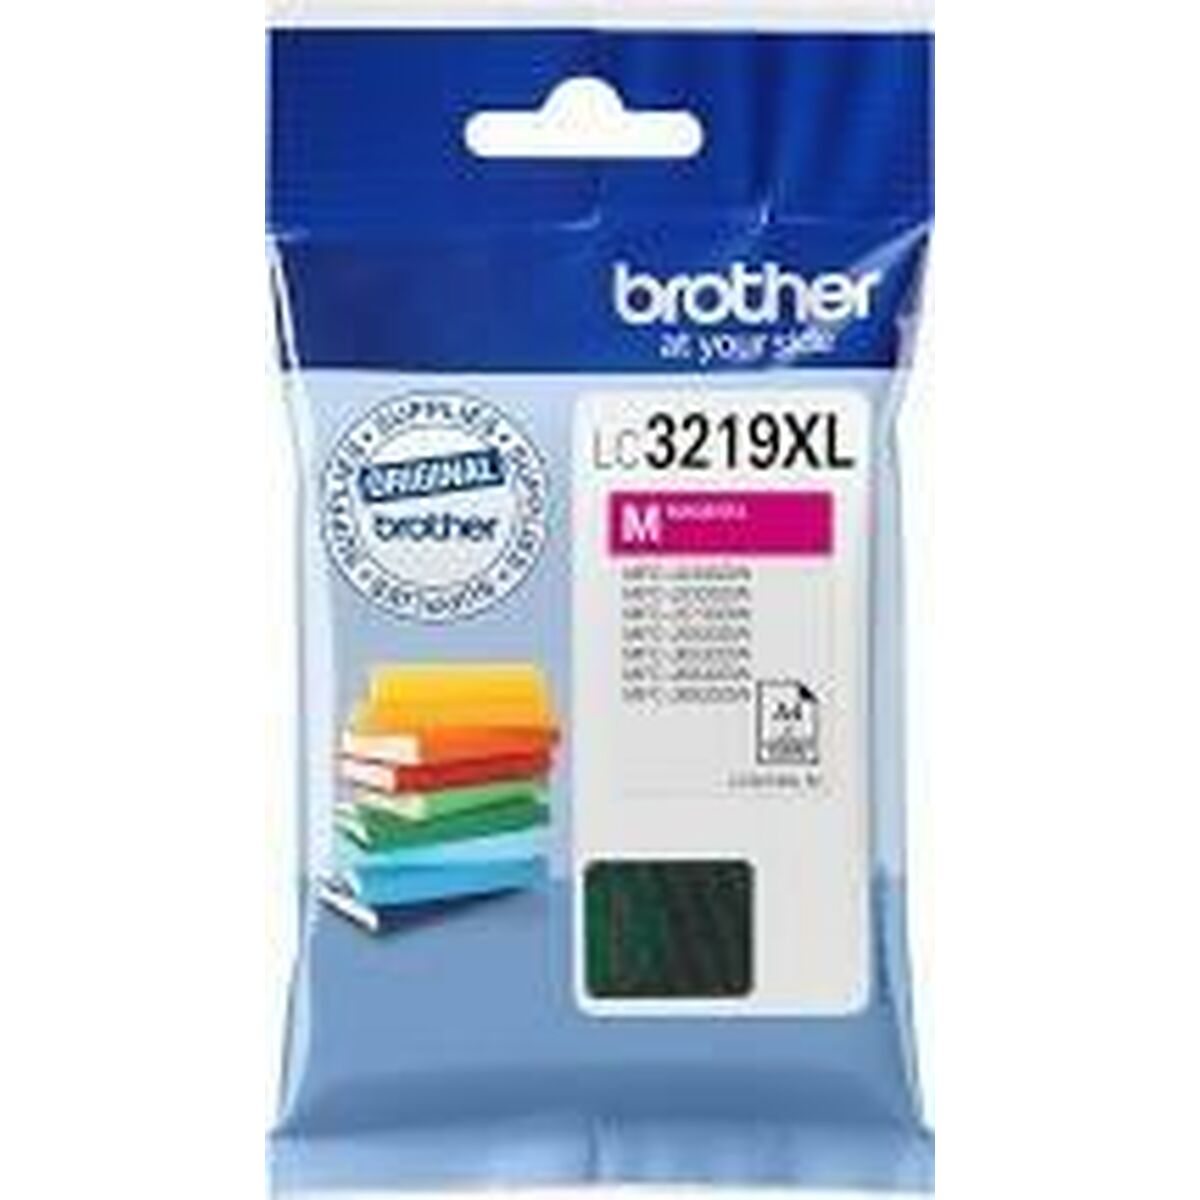 Original Ink Cartridge Brother LC3219XLM Magenta, Brother, Computing, Printers and accessories, original-ink-cartridge-brother-lc3219xlm-magenta, Brand_Brother, category-reference-2609, category-reference-2642, category-reference-2874, category-reference-t-19685, category-reference-t-19911, category-reference-t-21377, category-reference-t-25688, Condition_NEW, office, Price_100 - 200, RiotNook